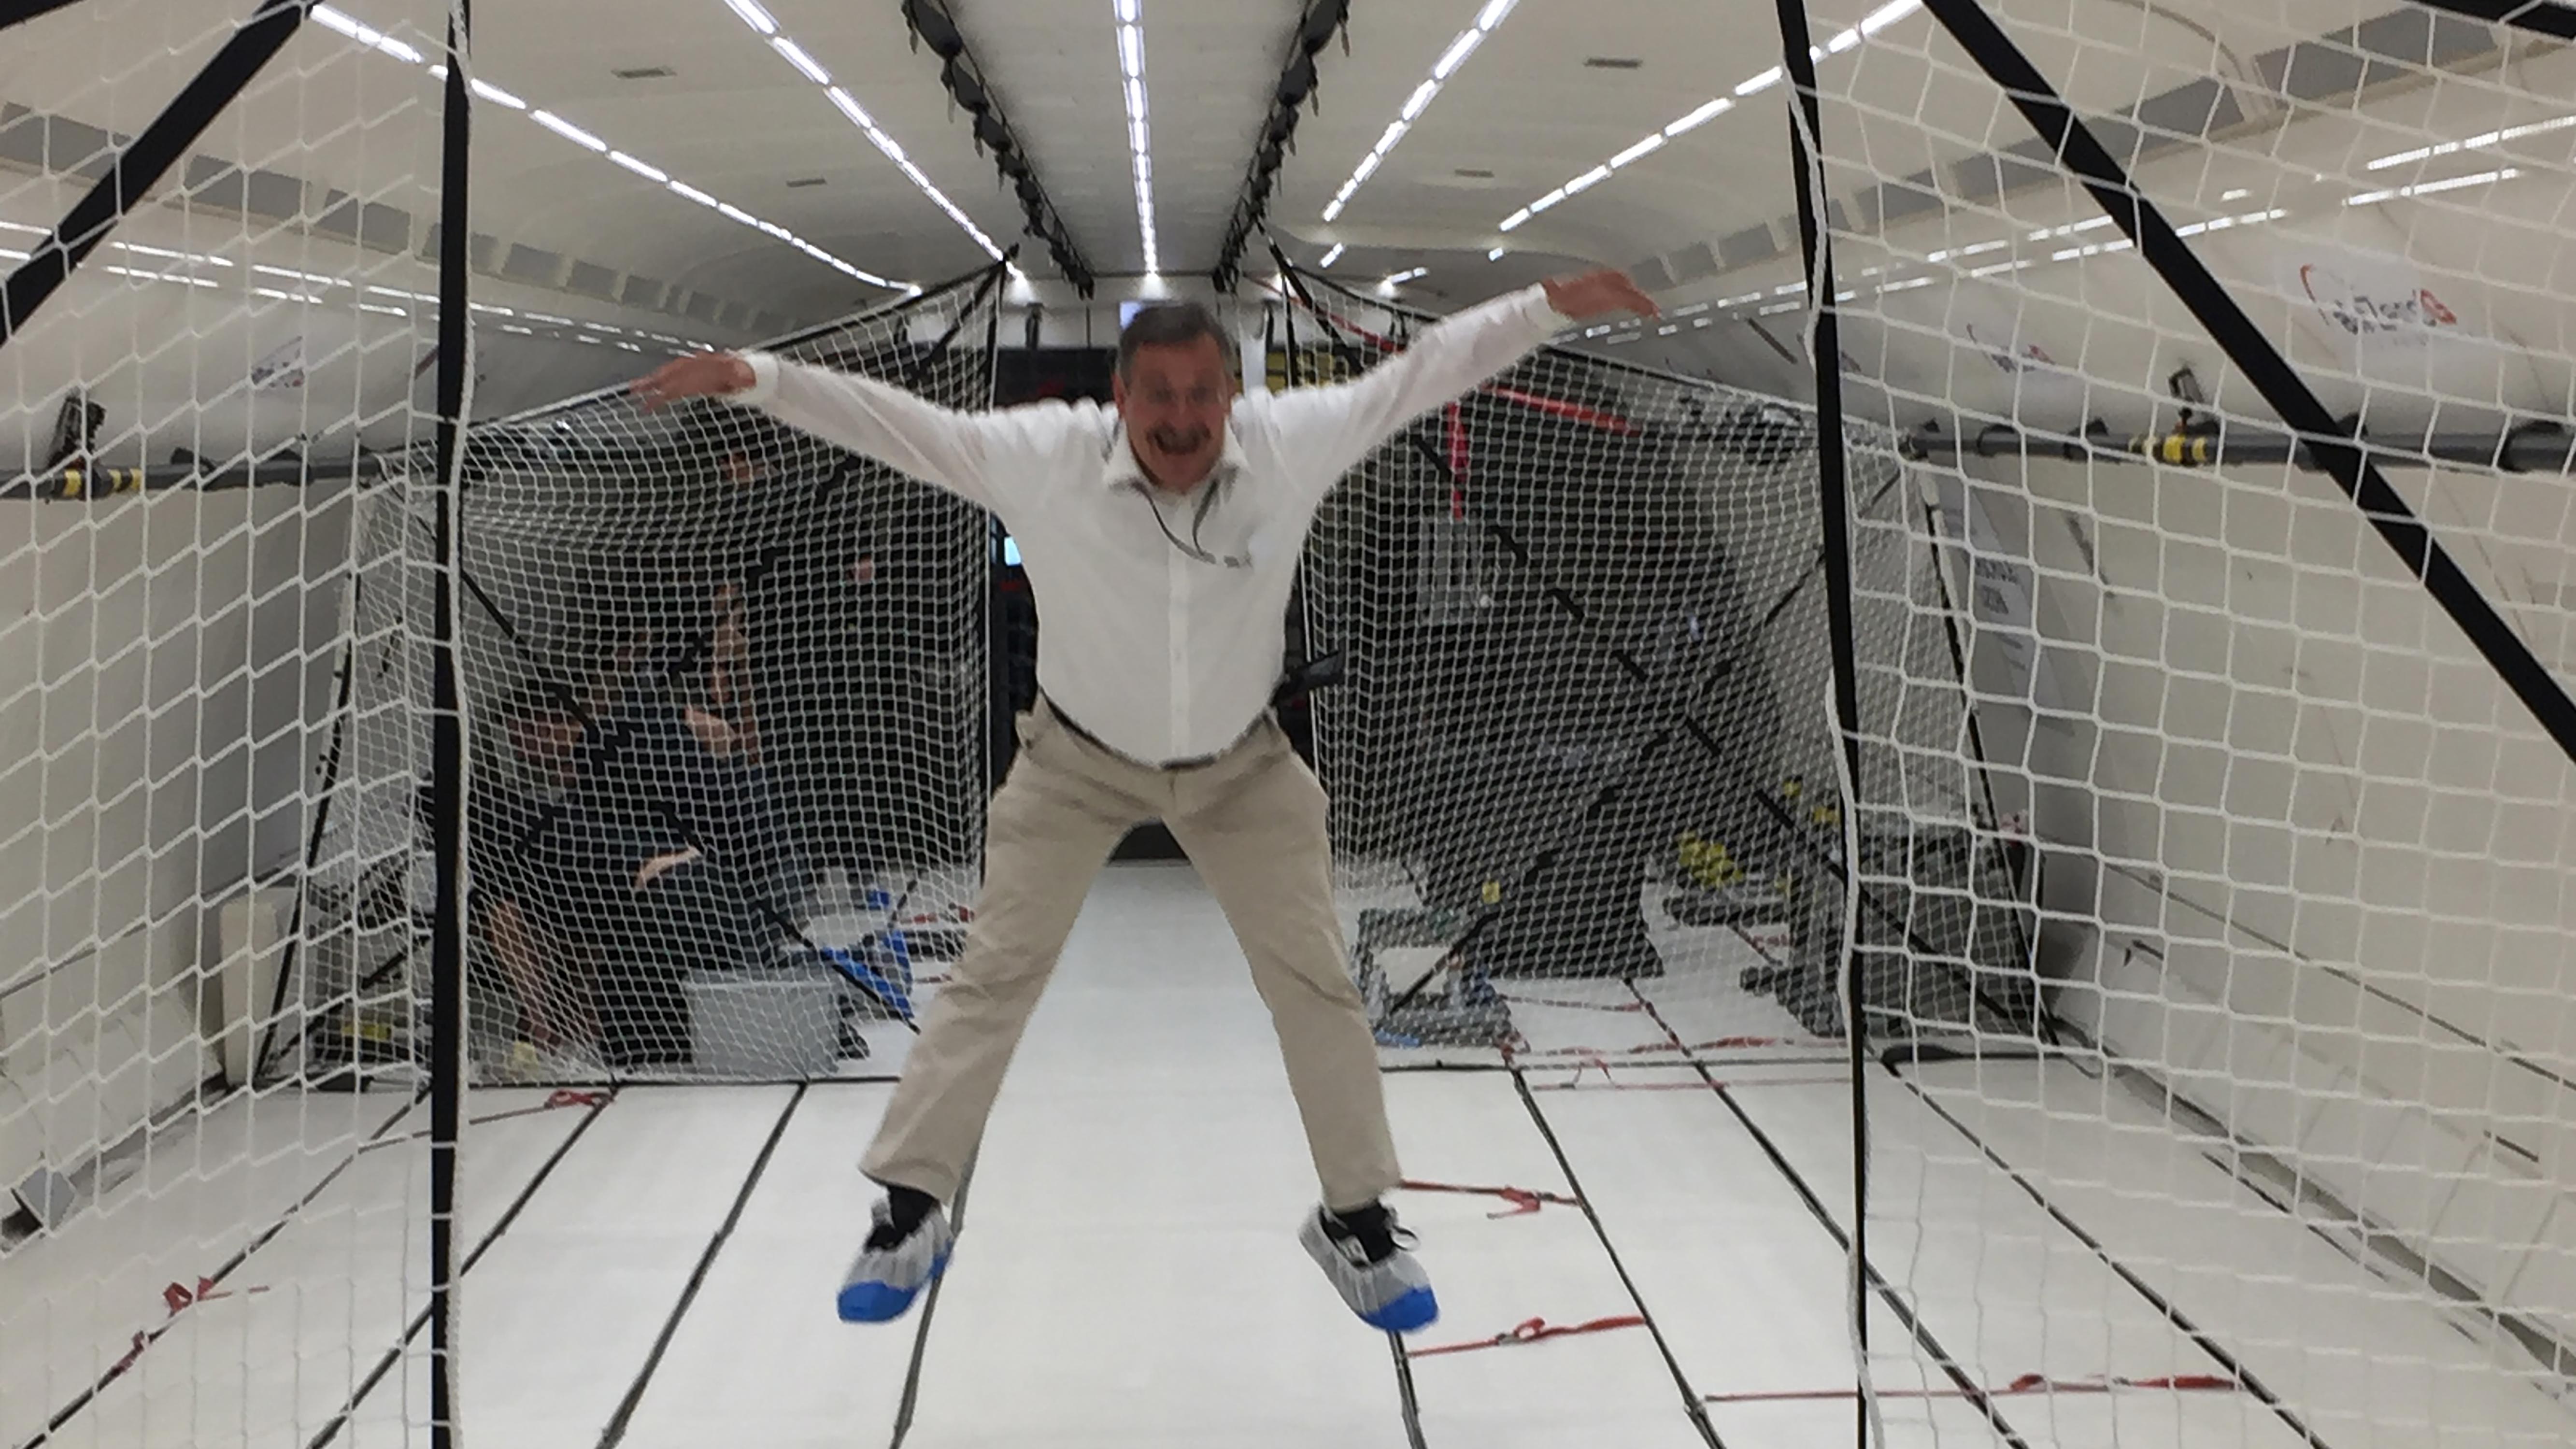 <p>Zero gravity? Not quite. In September 2018, the Executive Board of the University visited the Innovation Park in D&uuml;bendorf, where the UZH Space Hub conducts parabolic flights to research the effects of weightlessness. This picture, however, was taken with the airplane still on the ground and Michael Hengartner &ldquo;faking&rdquo; weightless for a laugh.</p> (Image: Jürg Dinner)